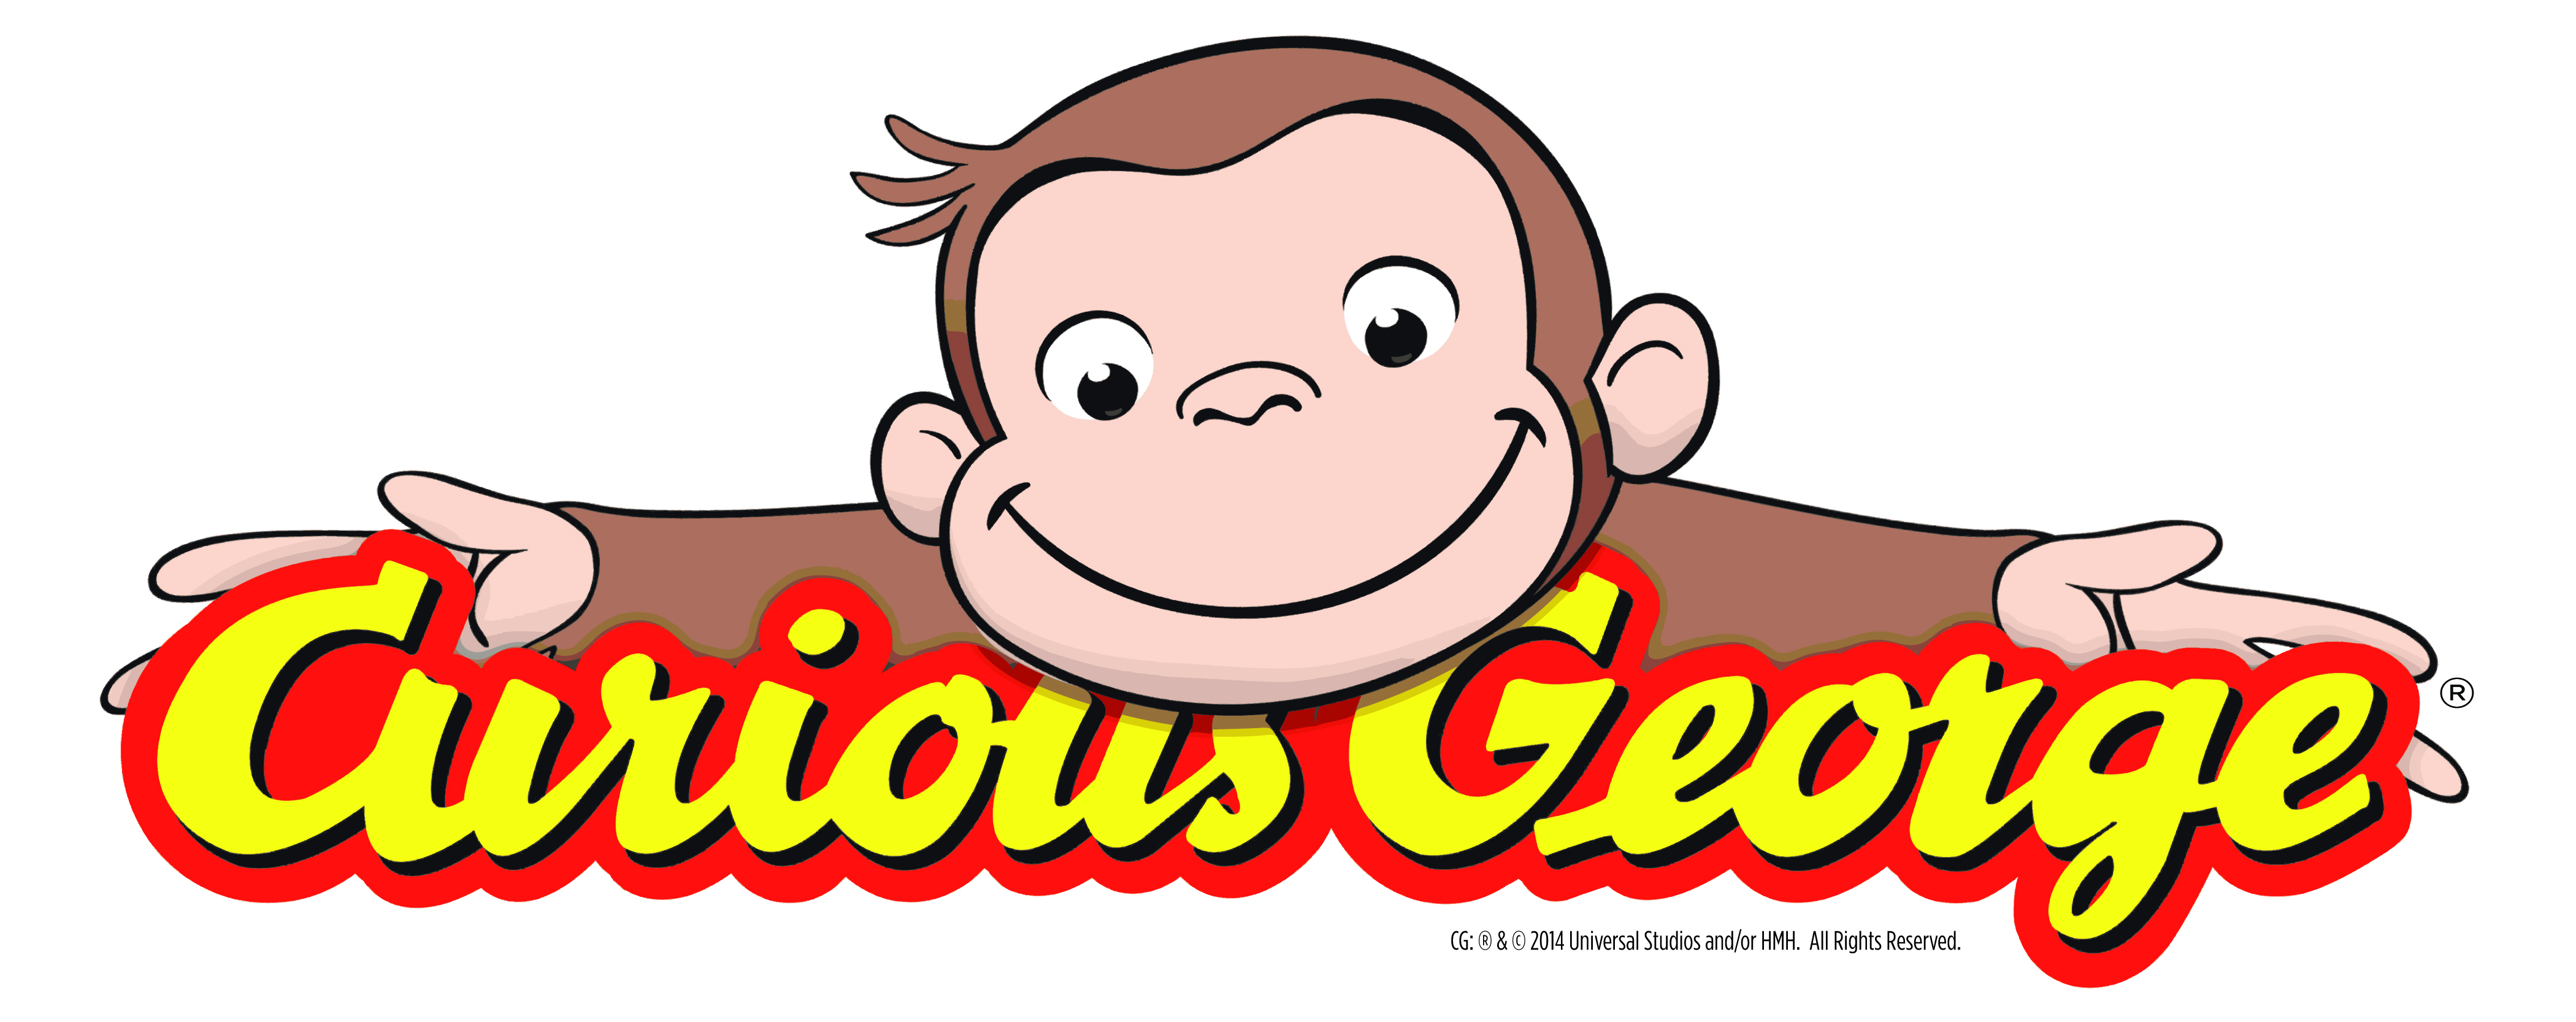 Nice Images Collection: Curious George Desktop Wallpapers